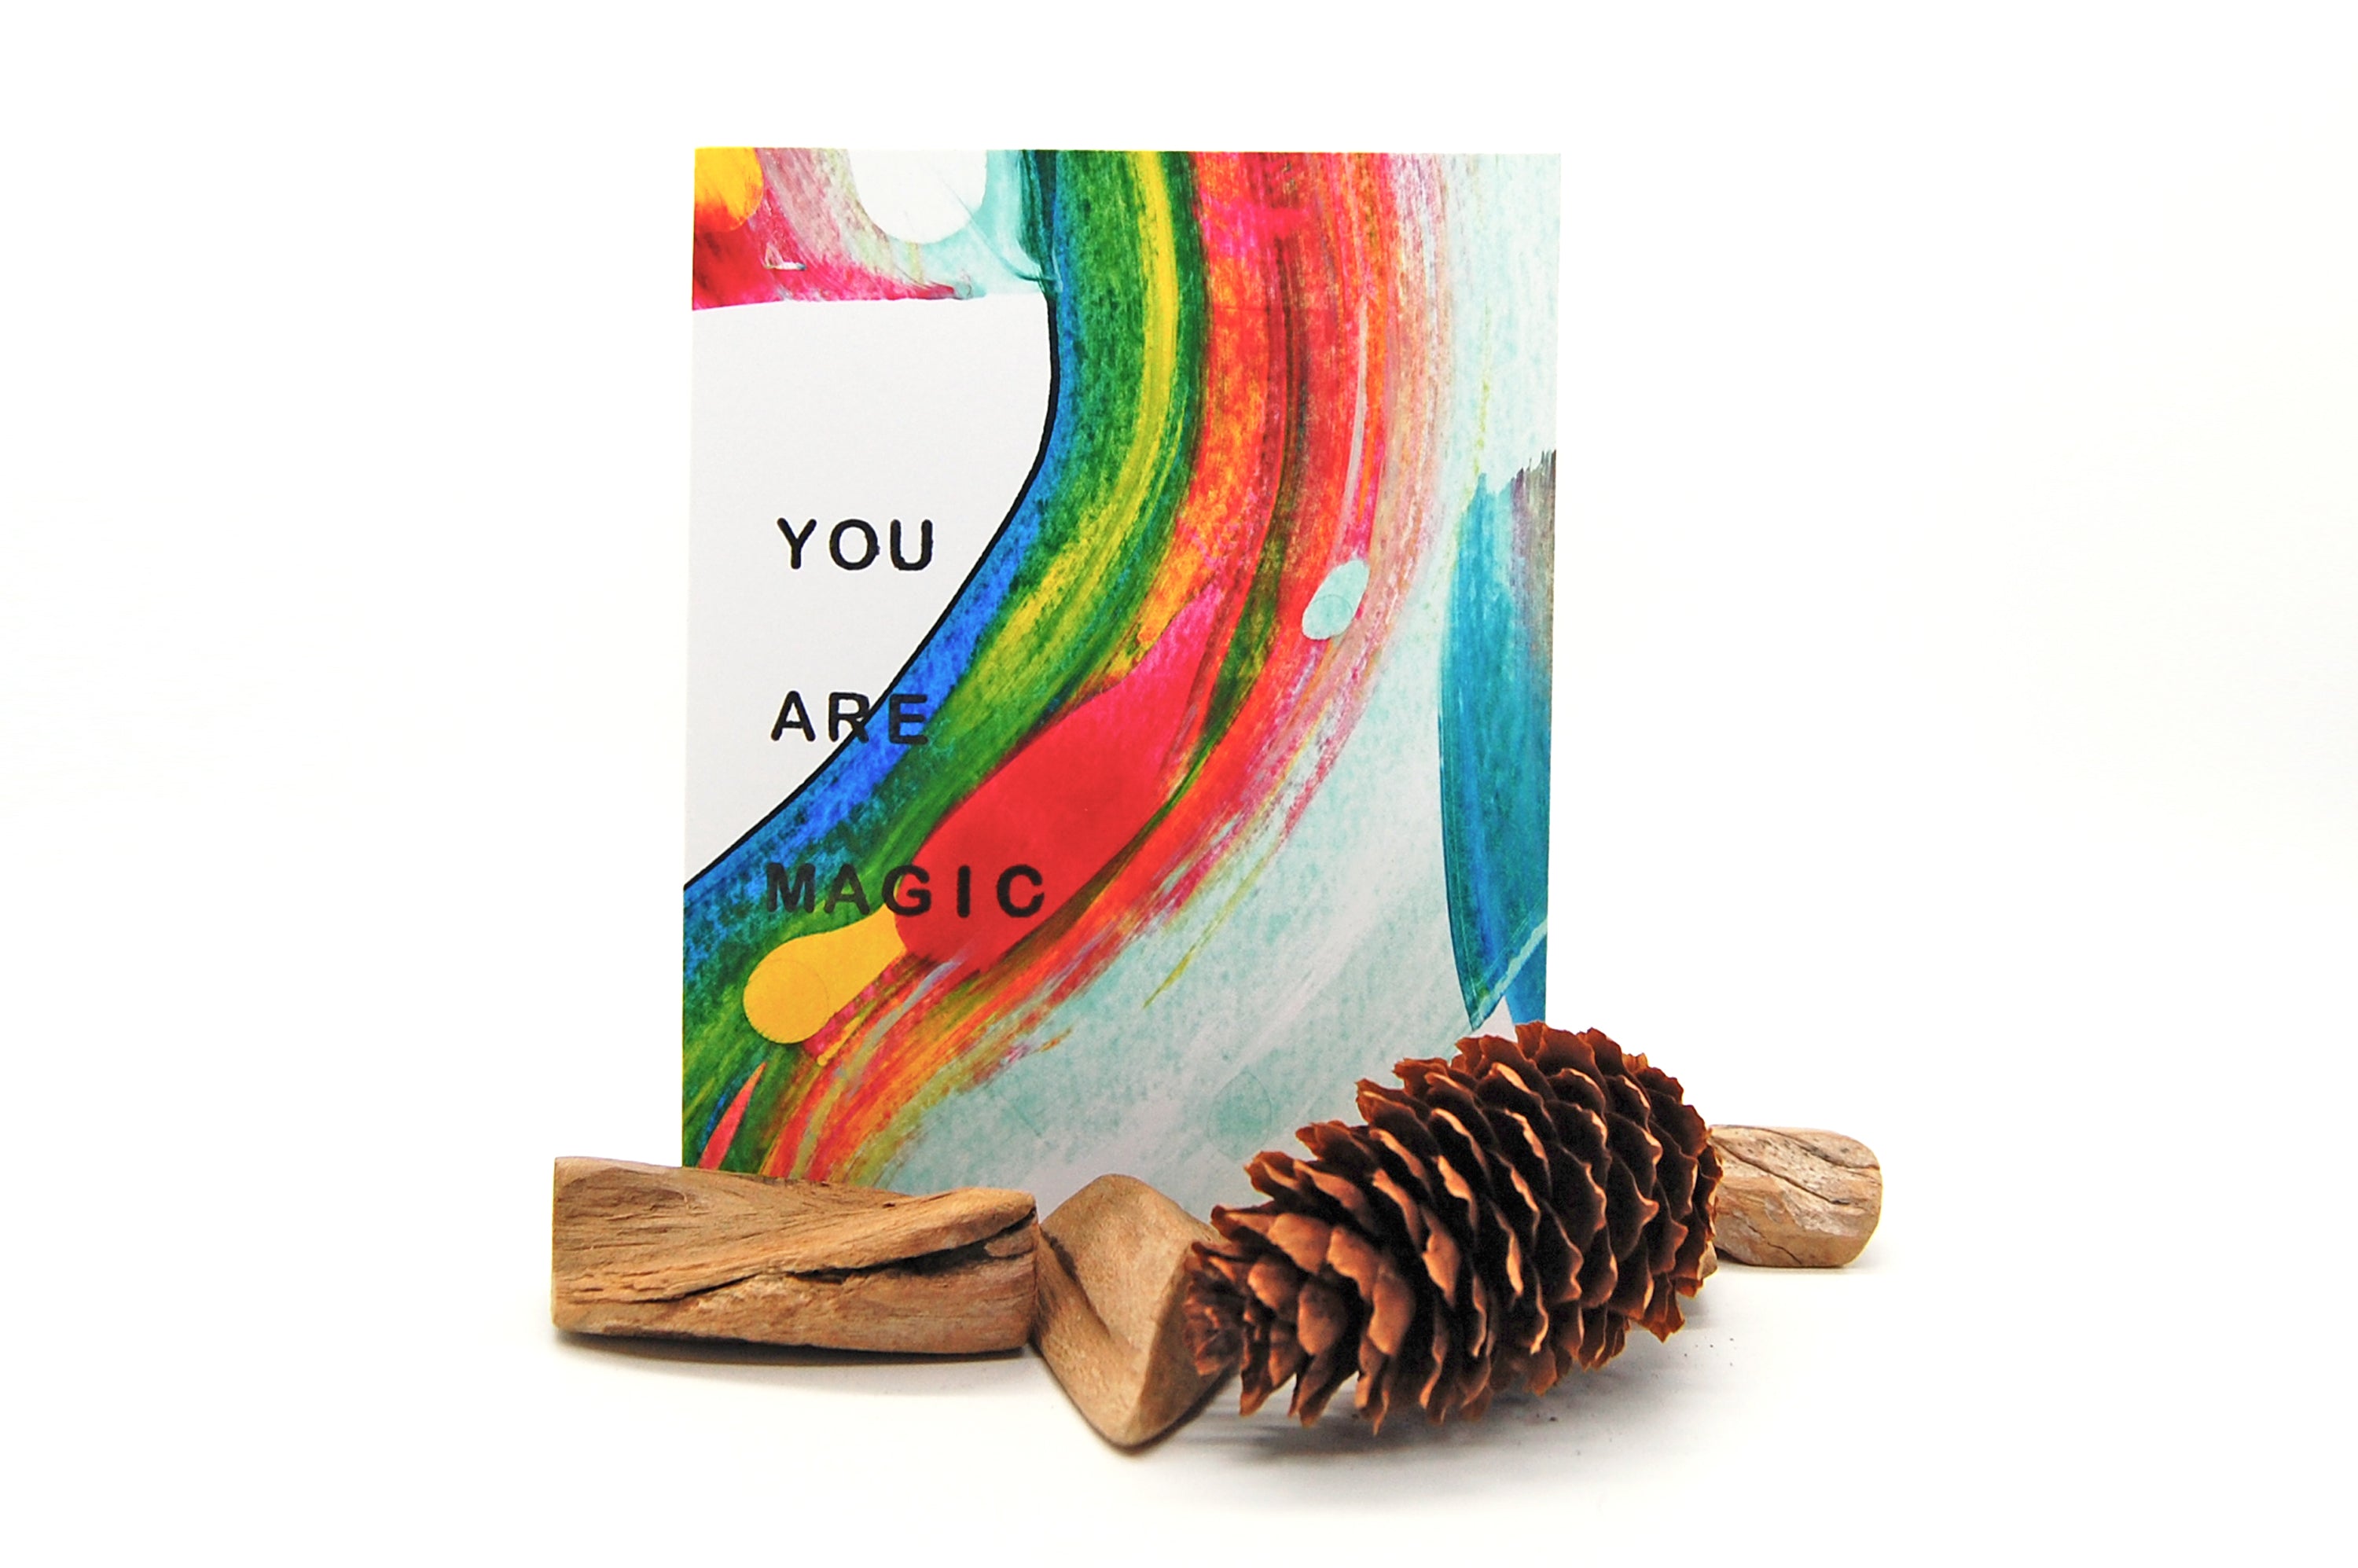 Arkward_You Are Magic_Stationery_Greeting cards